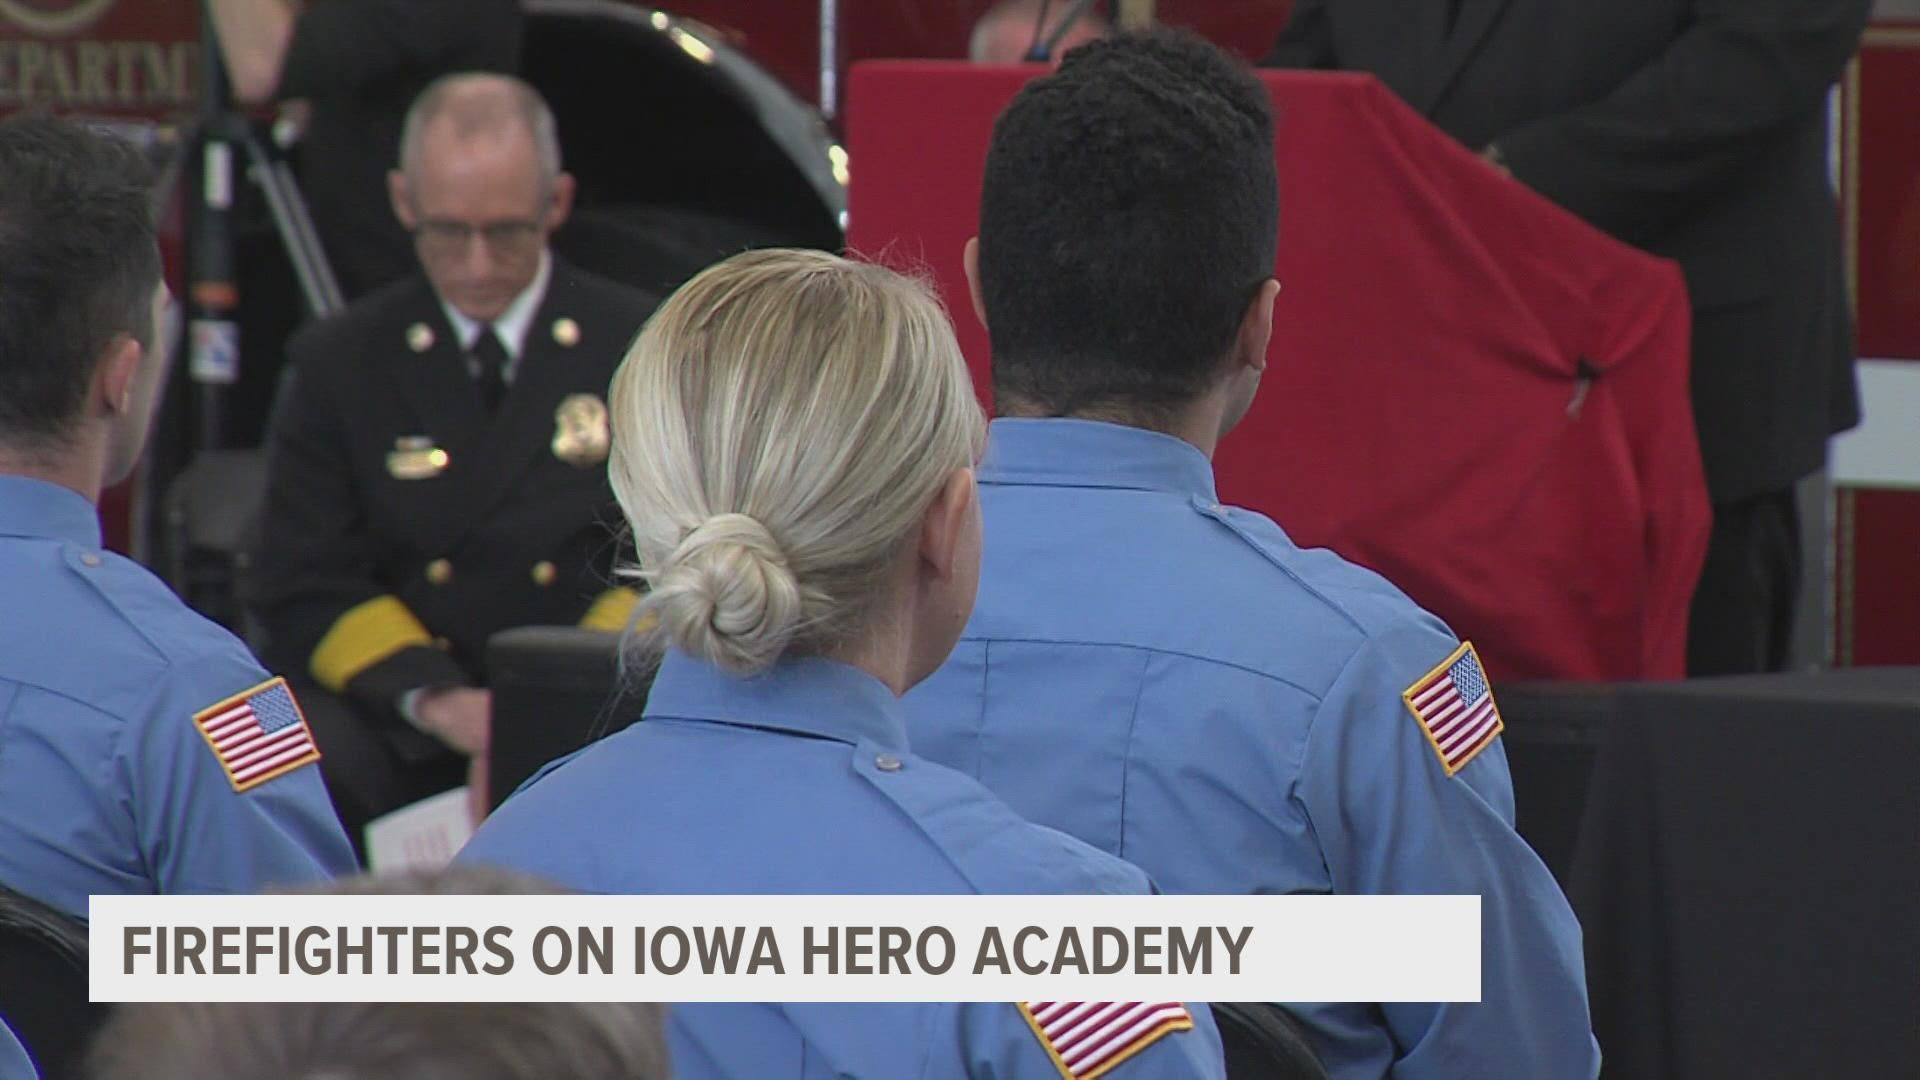 Four women were officially pinned to join the Des Moines Fire Department after participating in the program.